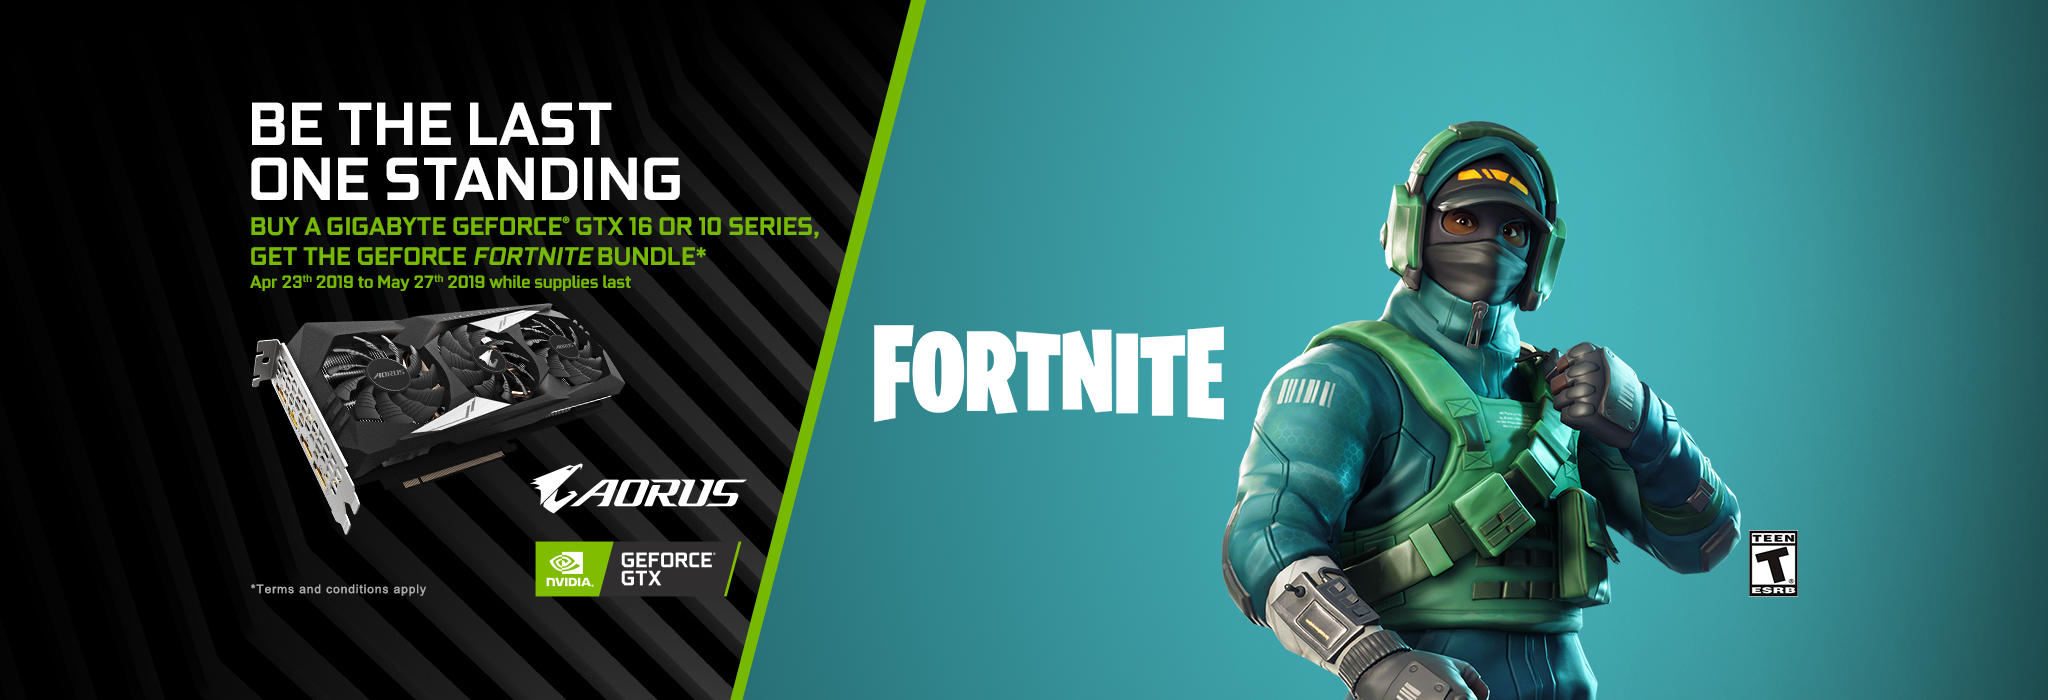 buy a qualified gigabyte geforce gtx 1660ti 1660 1650 1070ti 1070 1060 1050ti and 1050 graphics cards and get the geforce fortnite bundle - bundle fortnite nvidia